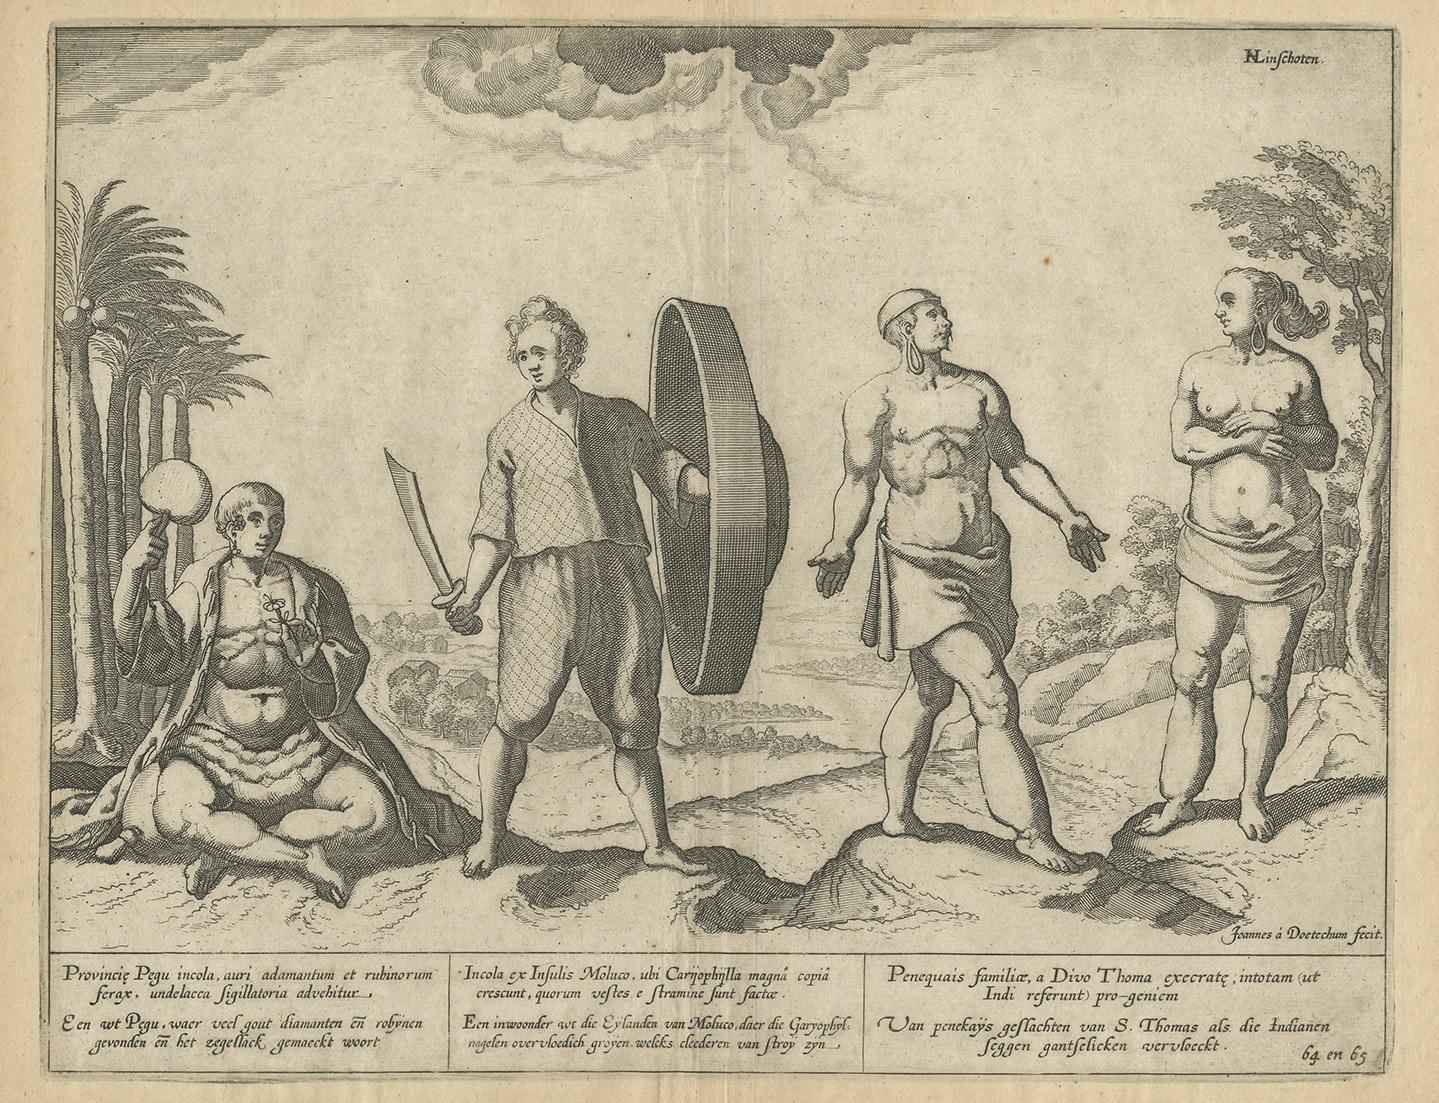 Antique print titled 'Provincie Pegu incola (..) - Incola ex Insulis Moluco (..) - Penequais familiae (..)'. Old print showing various figures including a man from Pegu, a man from the Moluccan islands, Penequais Indians and inhabitants of S.